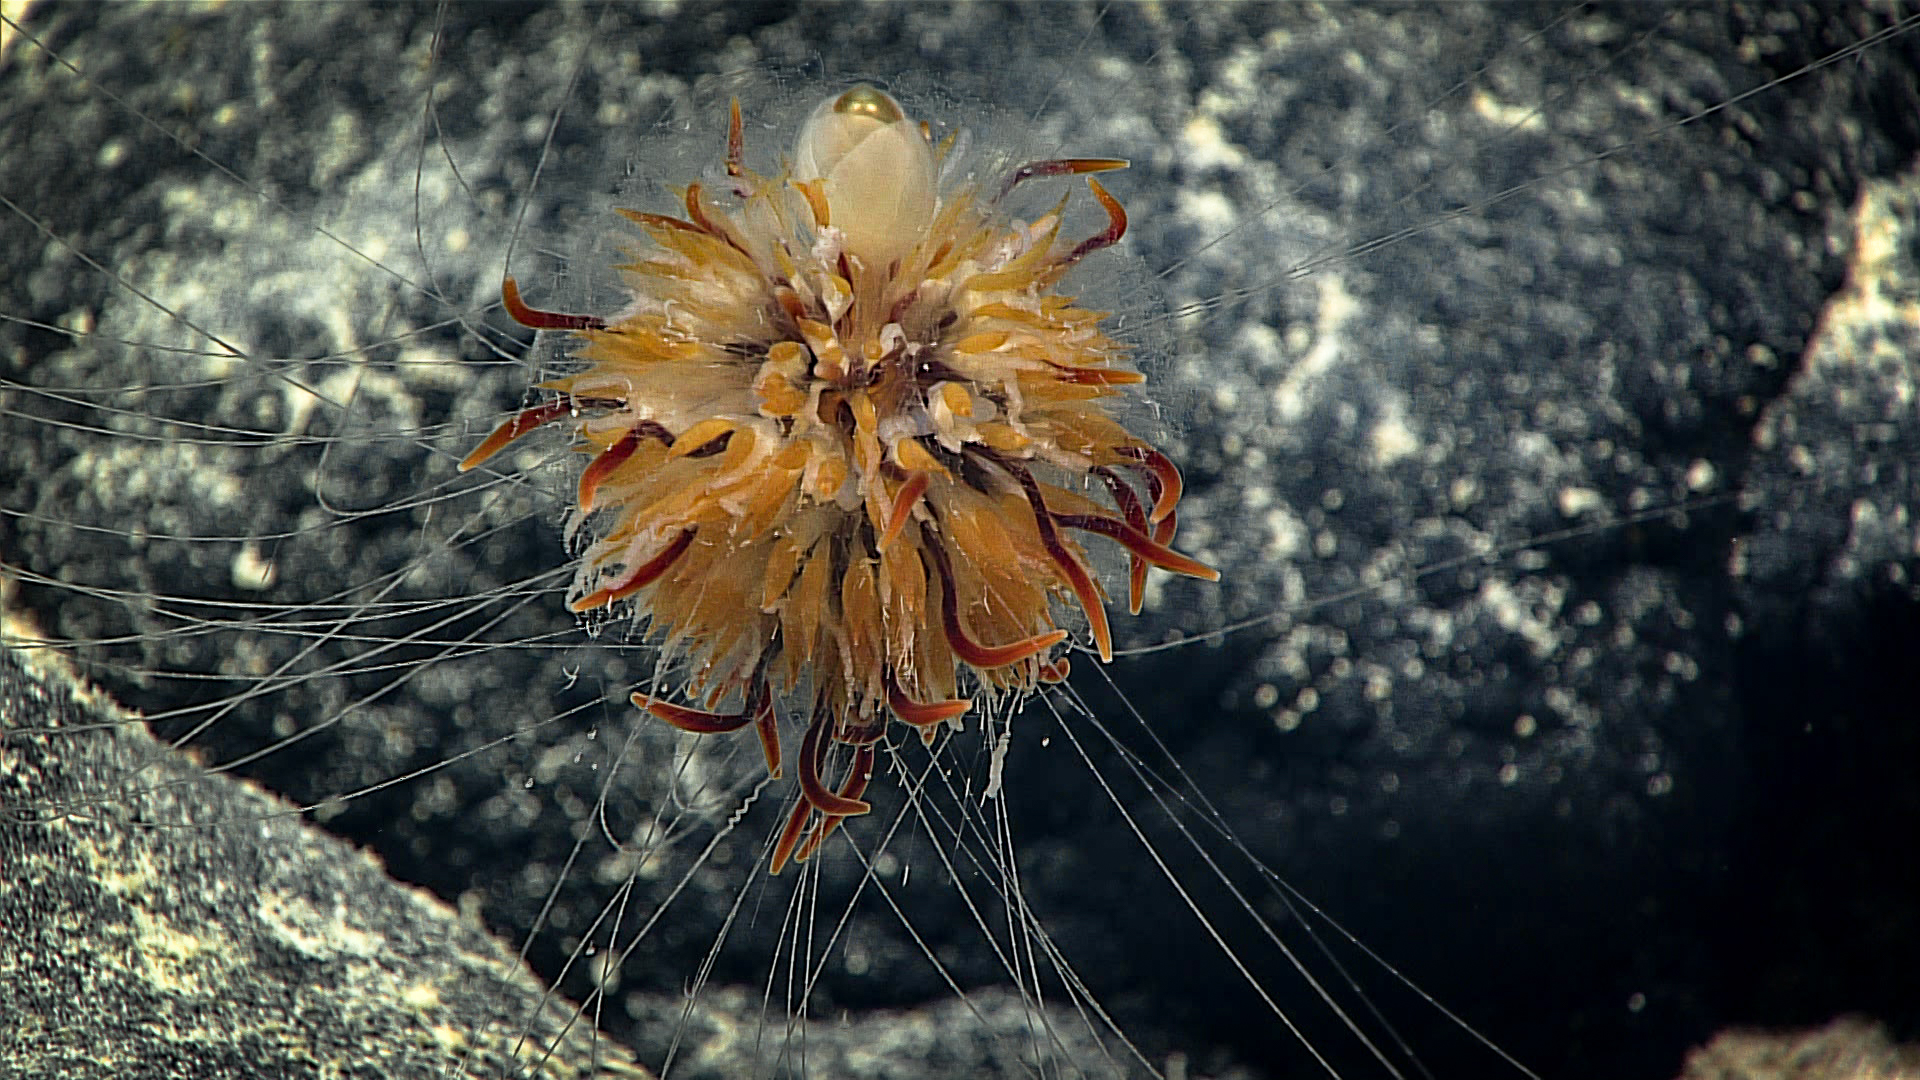 The majority of siphonophores are active swimmers, living in the water column of the open ocean. An exception is the “dandelion siphonophore.” Belonging to the family Rhodaliidae, these animals tether themselves to the seafloor using their tentacles. This siphonophore, which is a potentially new species, was imaged using its tentacles to attach to iron-manganese encrusted rocks on the deep slopes of Rose Atoll.